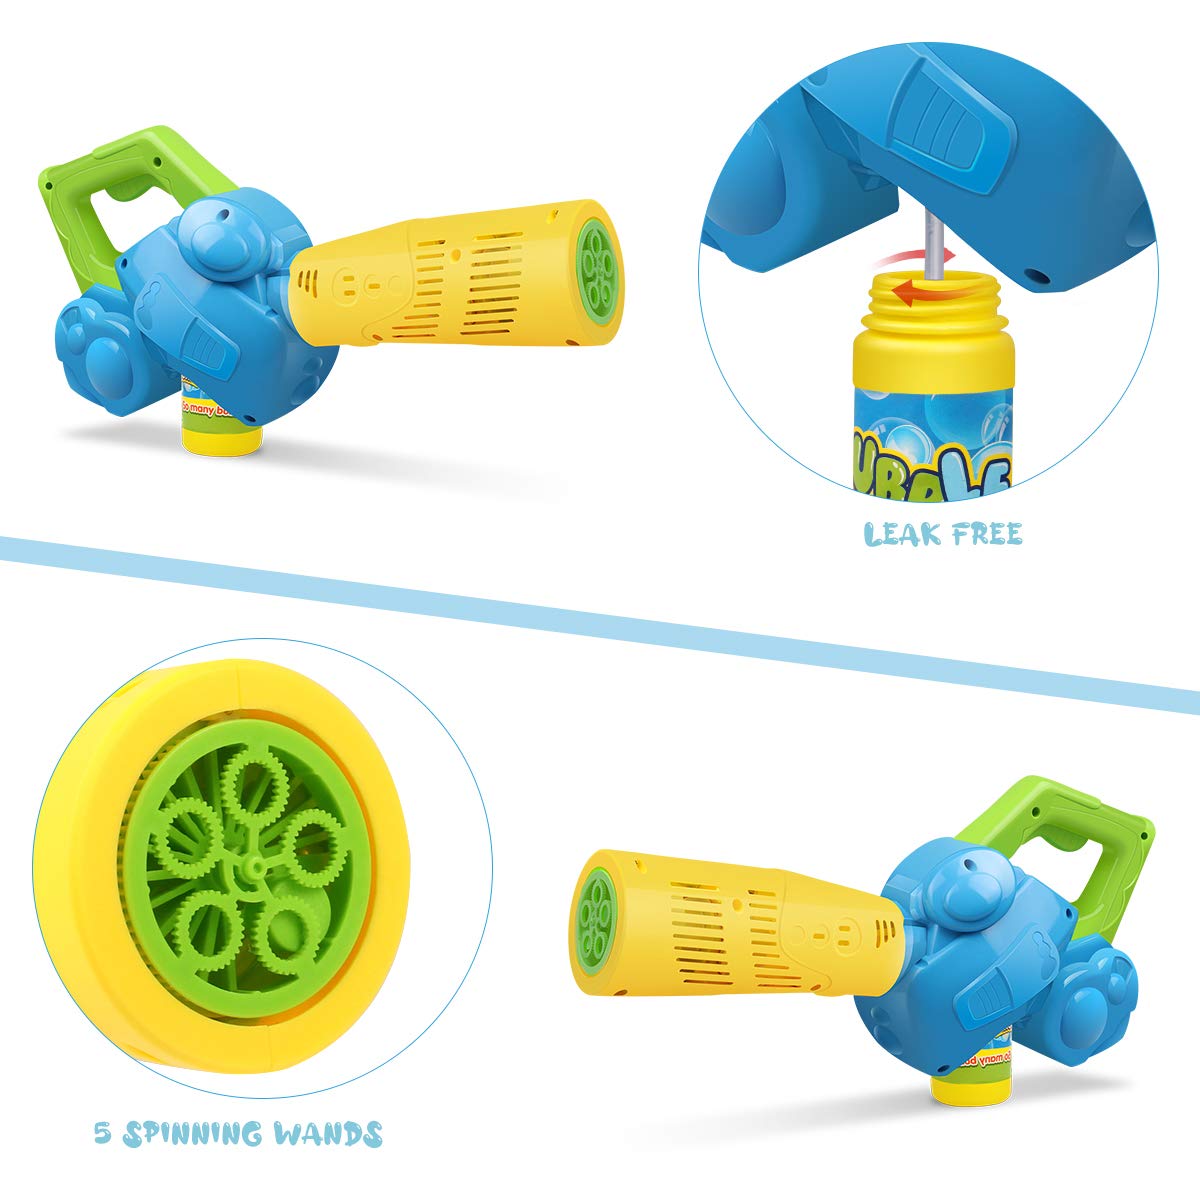 Duckura Bubble Leaf Blower for Toddlers, Kids Bubble Blower Machine with 3 Bubble Solution, Summer Outdoor Toys, Halloween Party